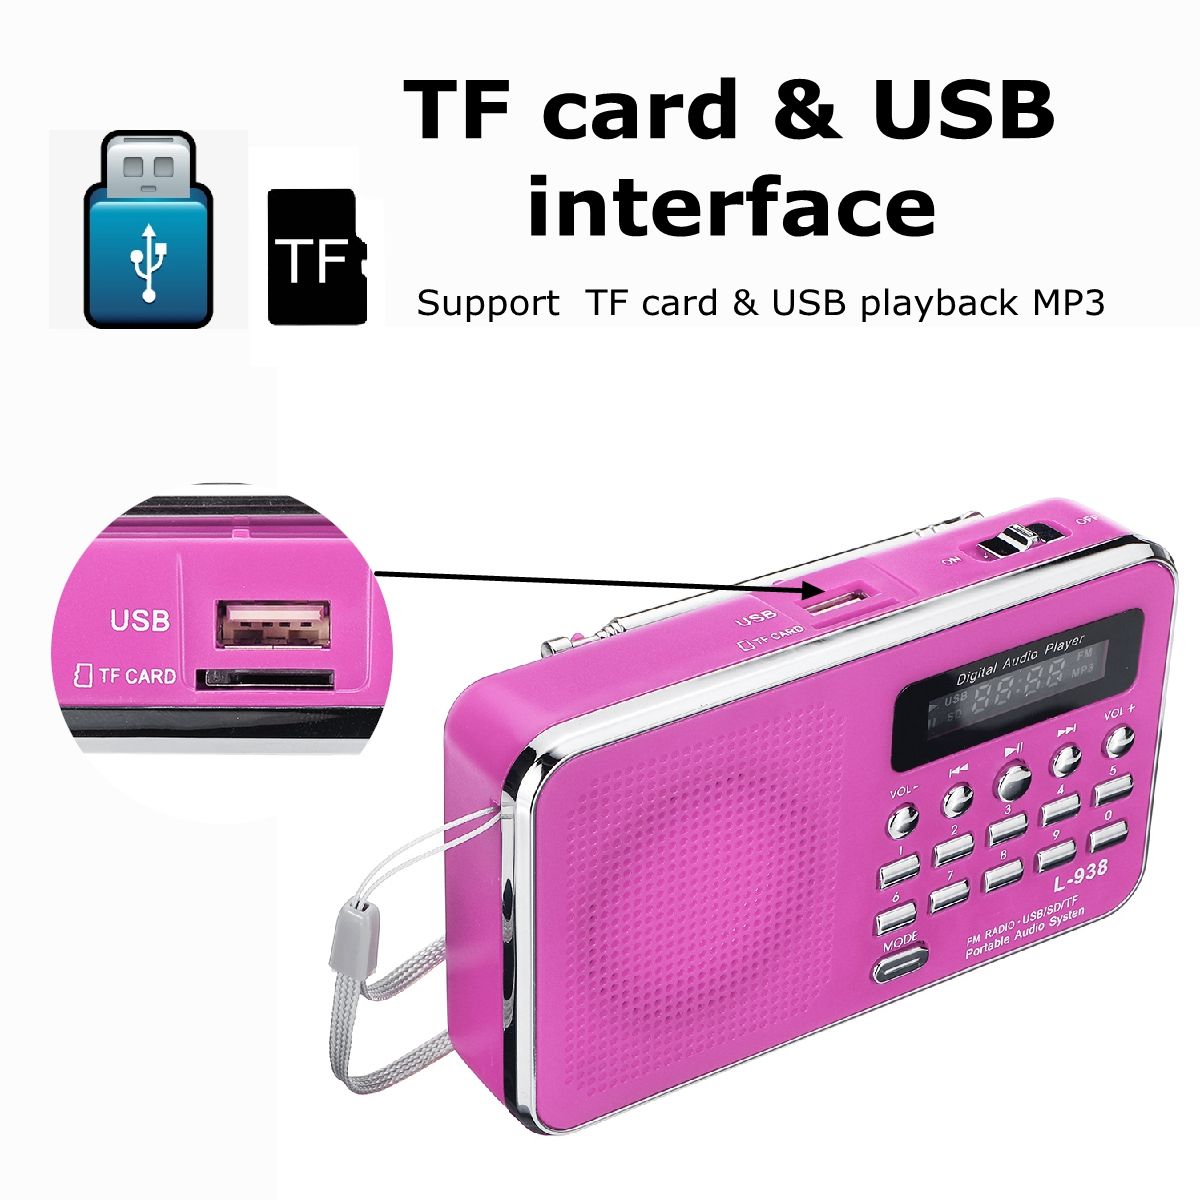 Portable-FM-875-108MHZ-42V-4Omega-Radio-TF-SD-Card-AUX-Loop-Play-Speaker-MP3-Music-Player-1525688